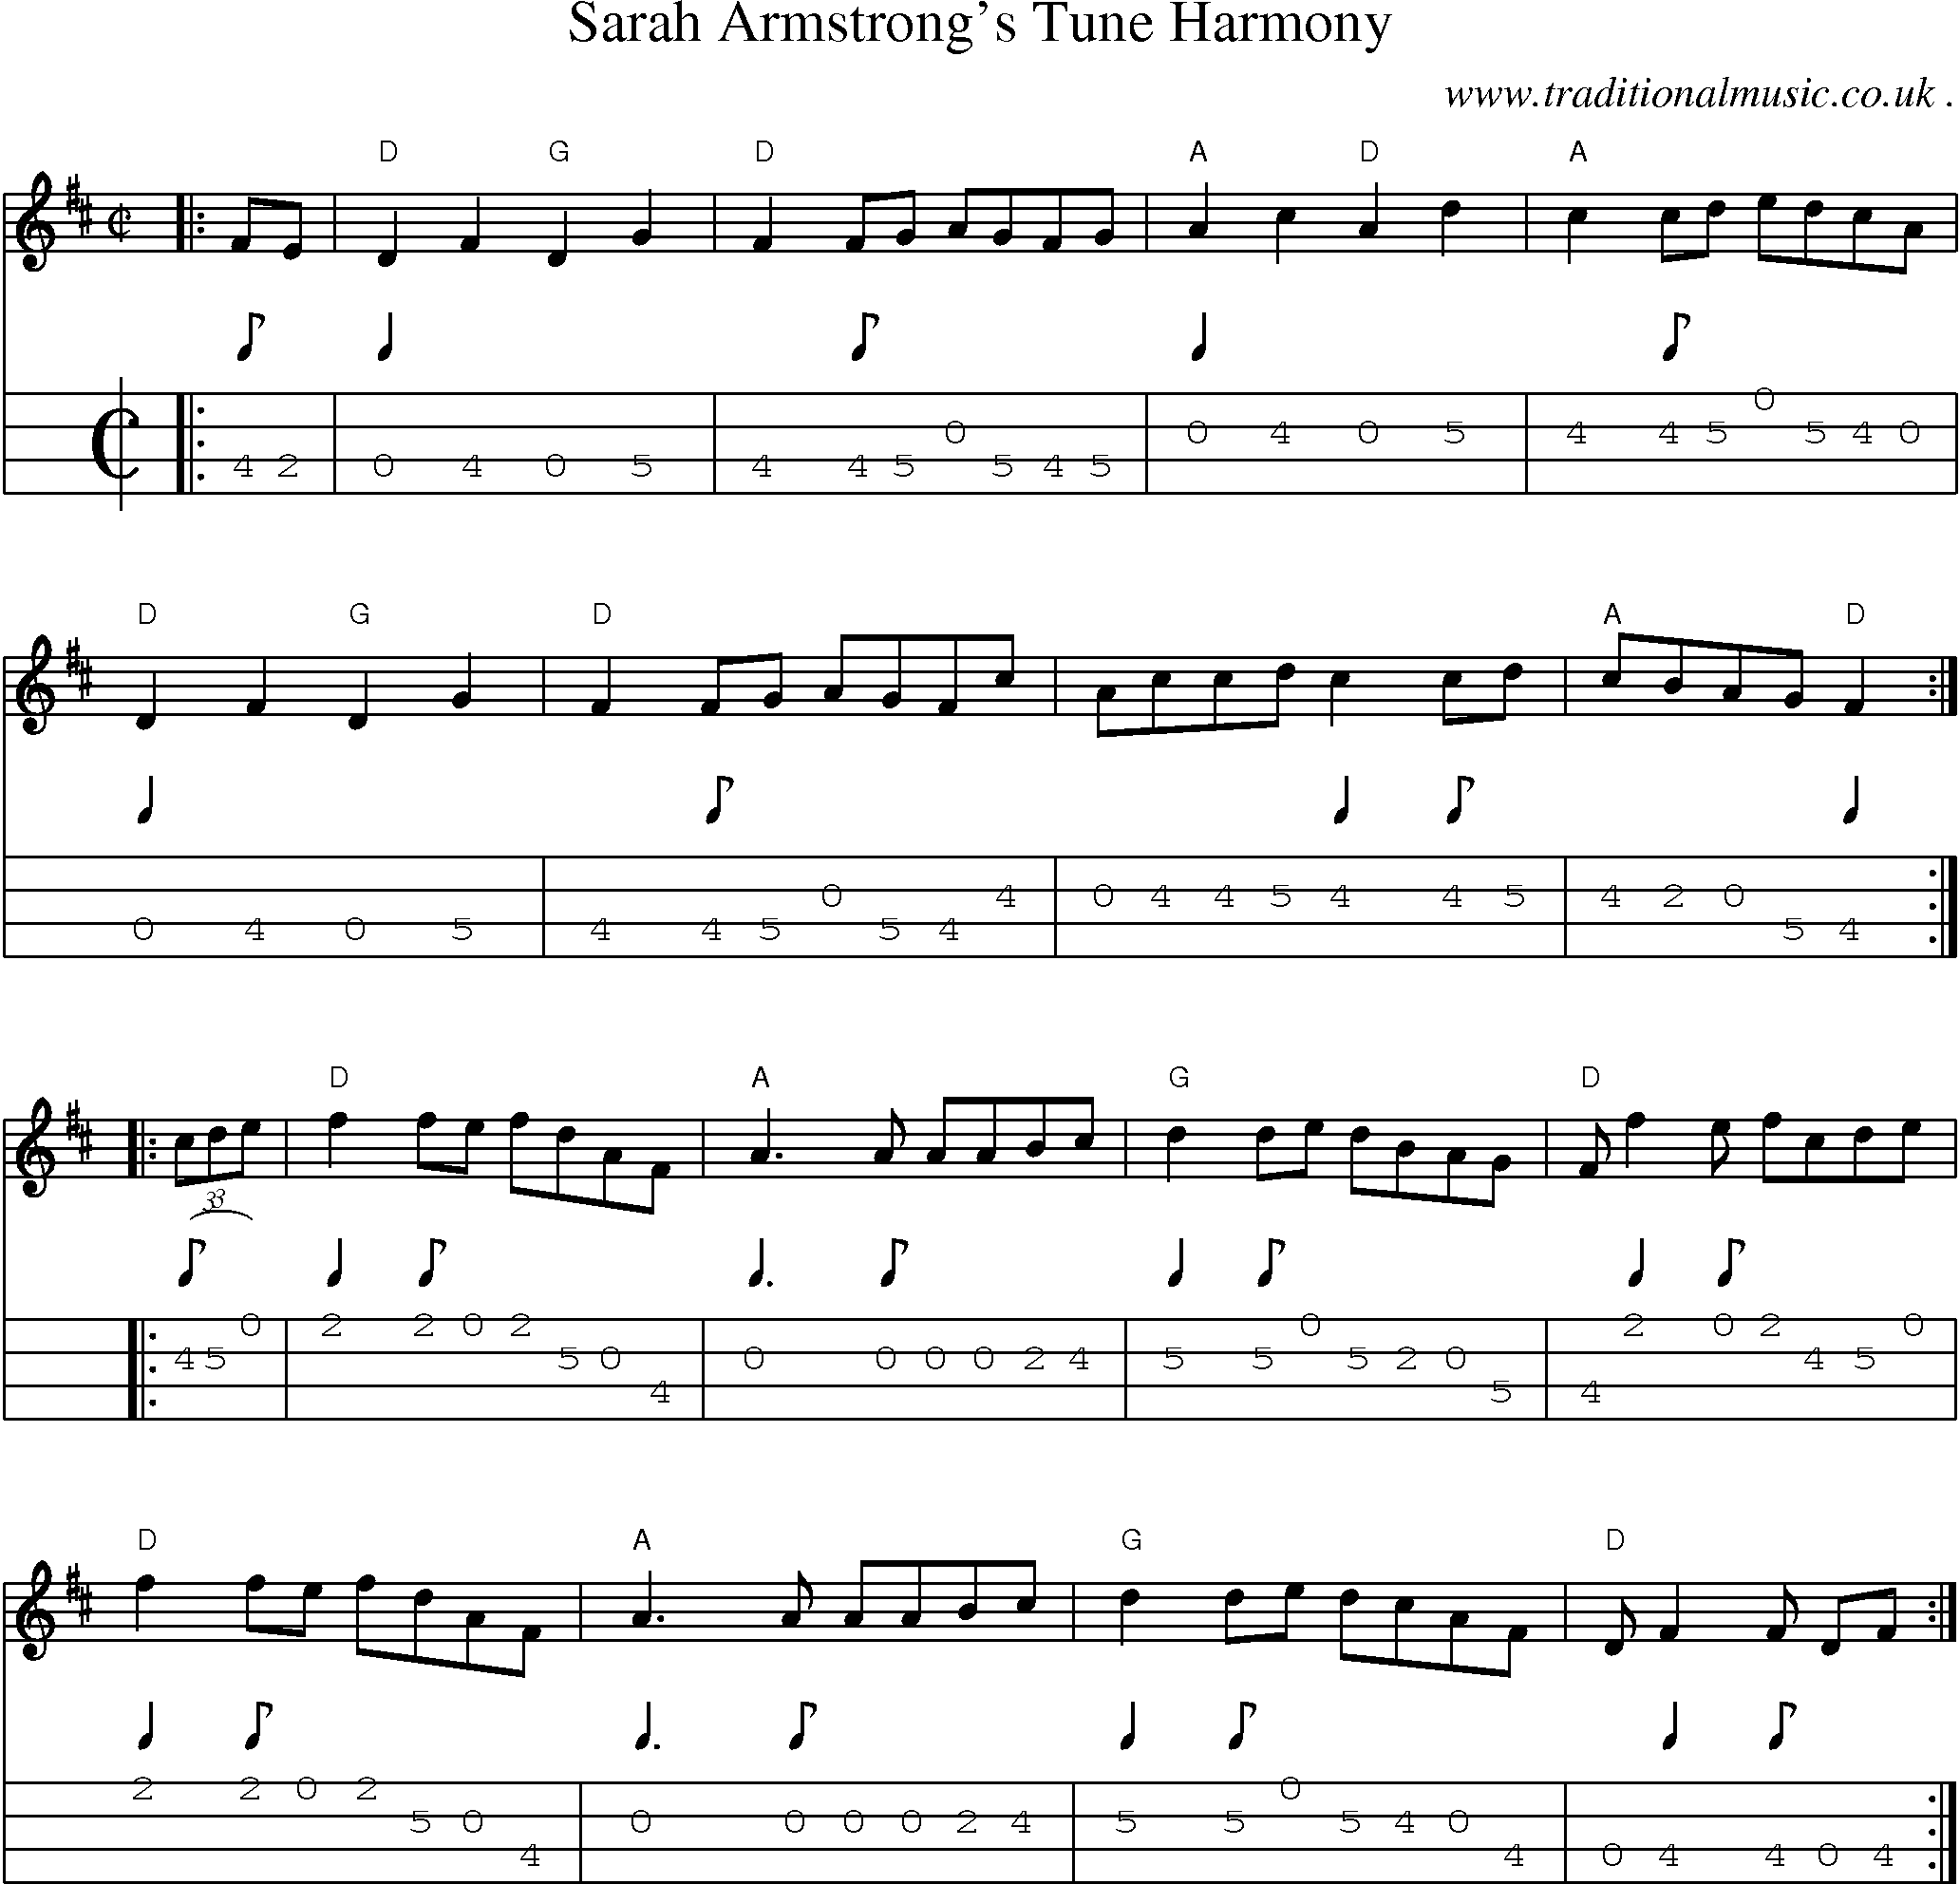 Music Score and Guitar Tabs for Sarah Armstrongs Tune Harmony